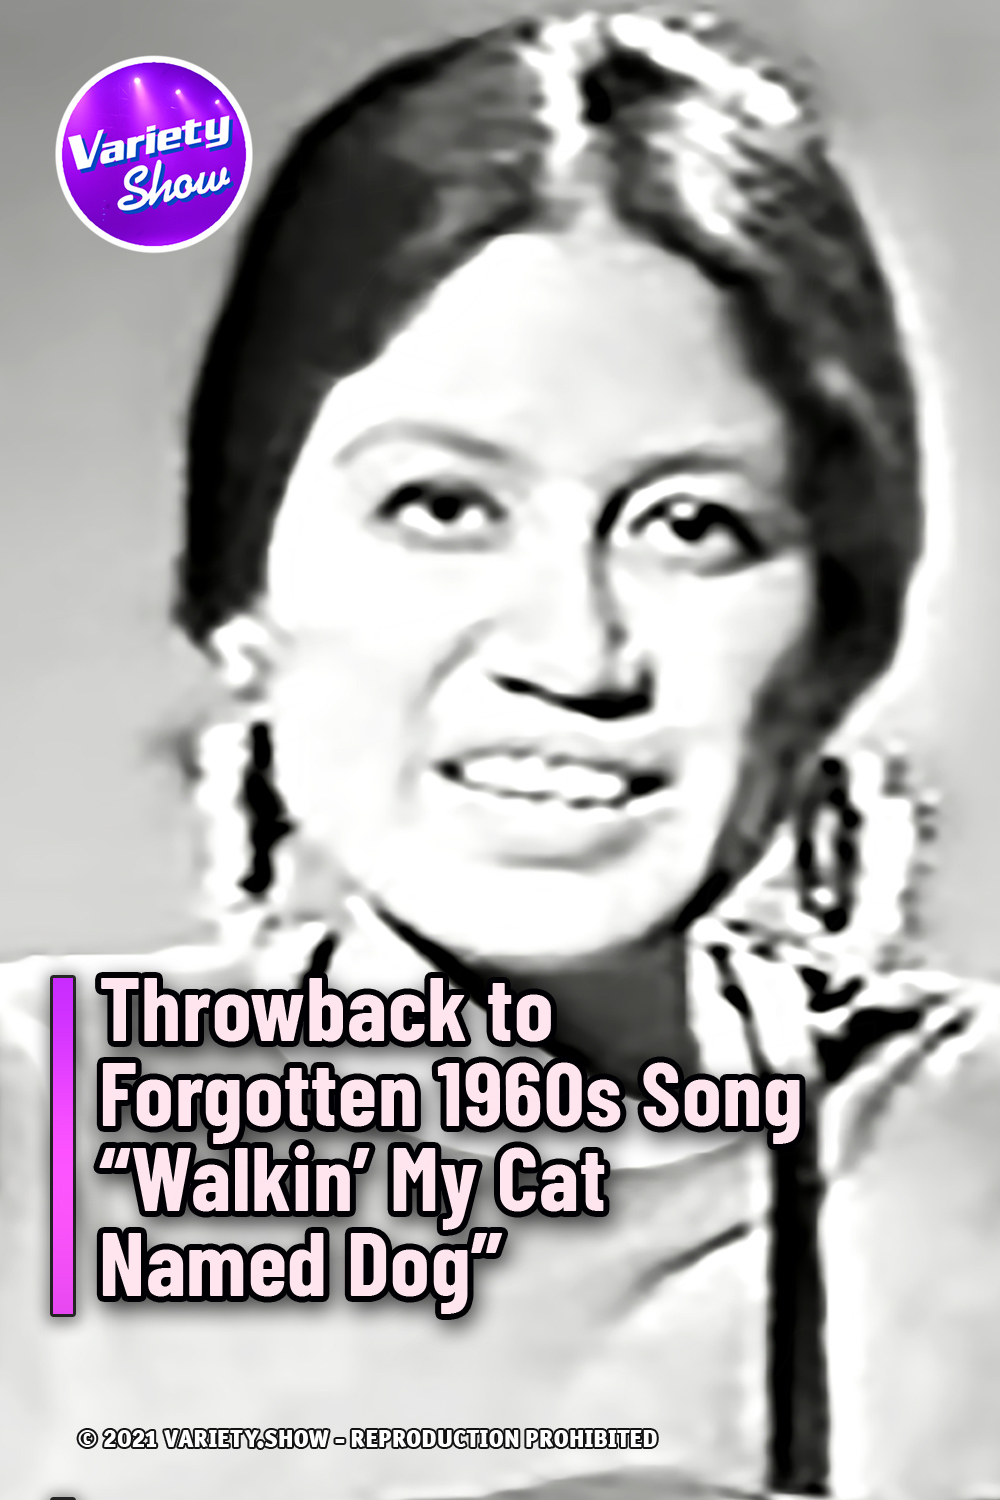 Throwback to Forgotten 1960s Song “Walkin’ My Cat Named Dog”